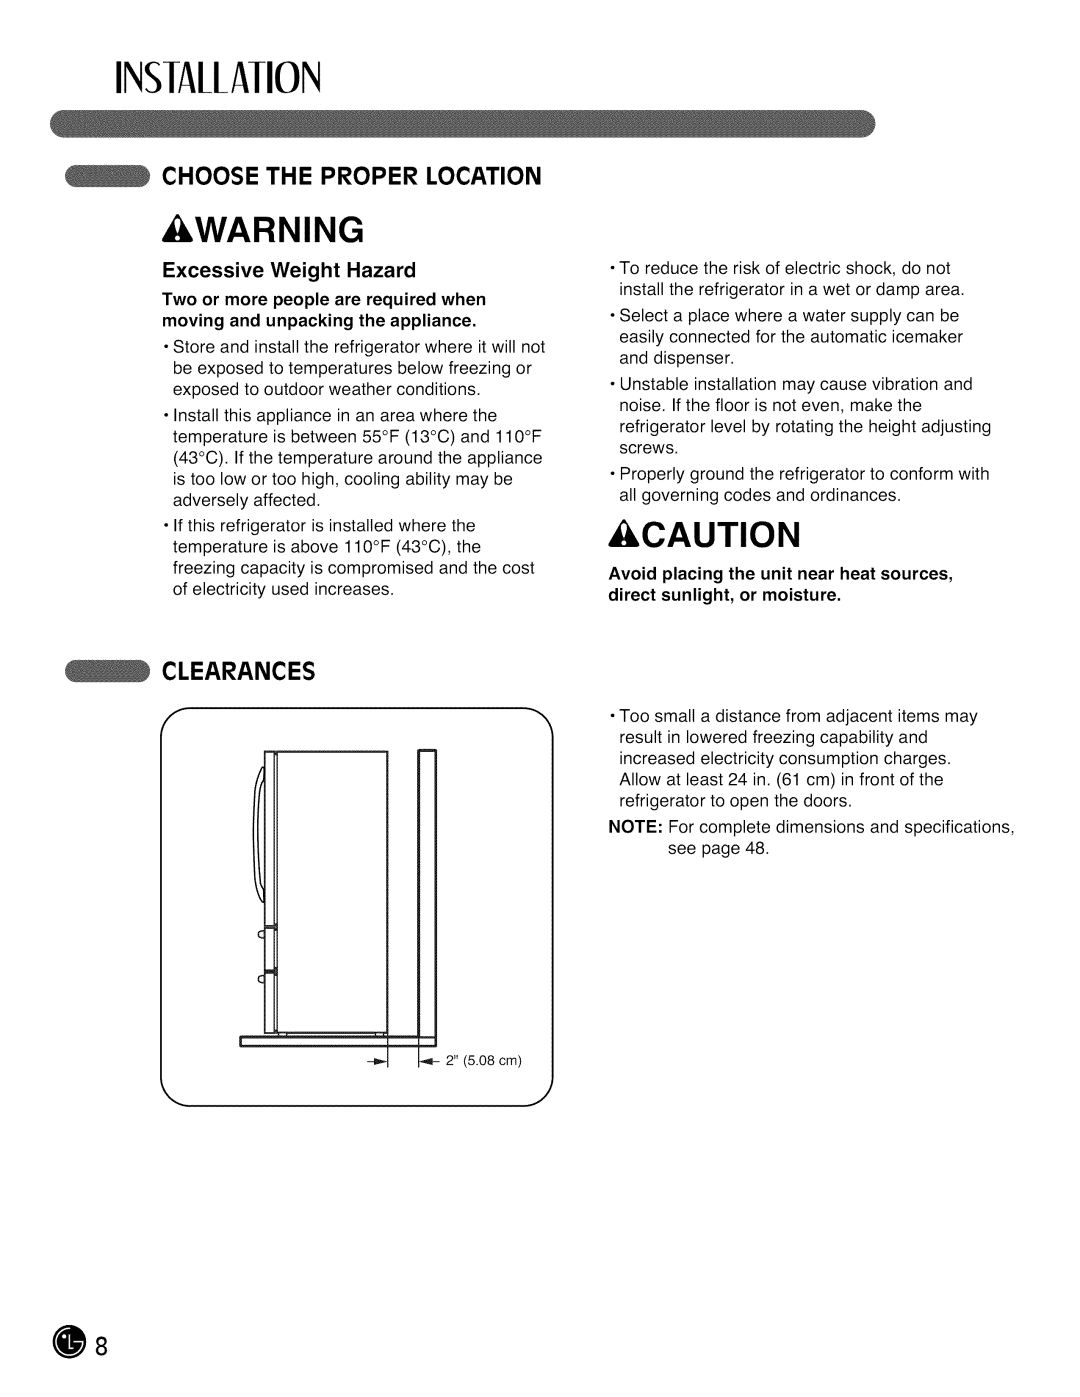 LG Electronics LMX28988 INSIAllAIION, Caution, Choose The Proper Location, Clearances, Excessive Weight Hazard, Warning 